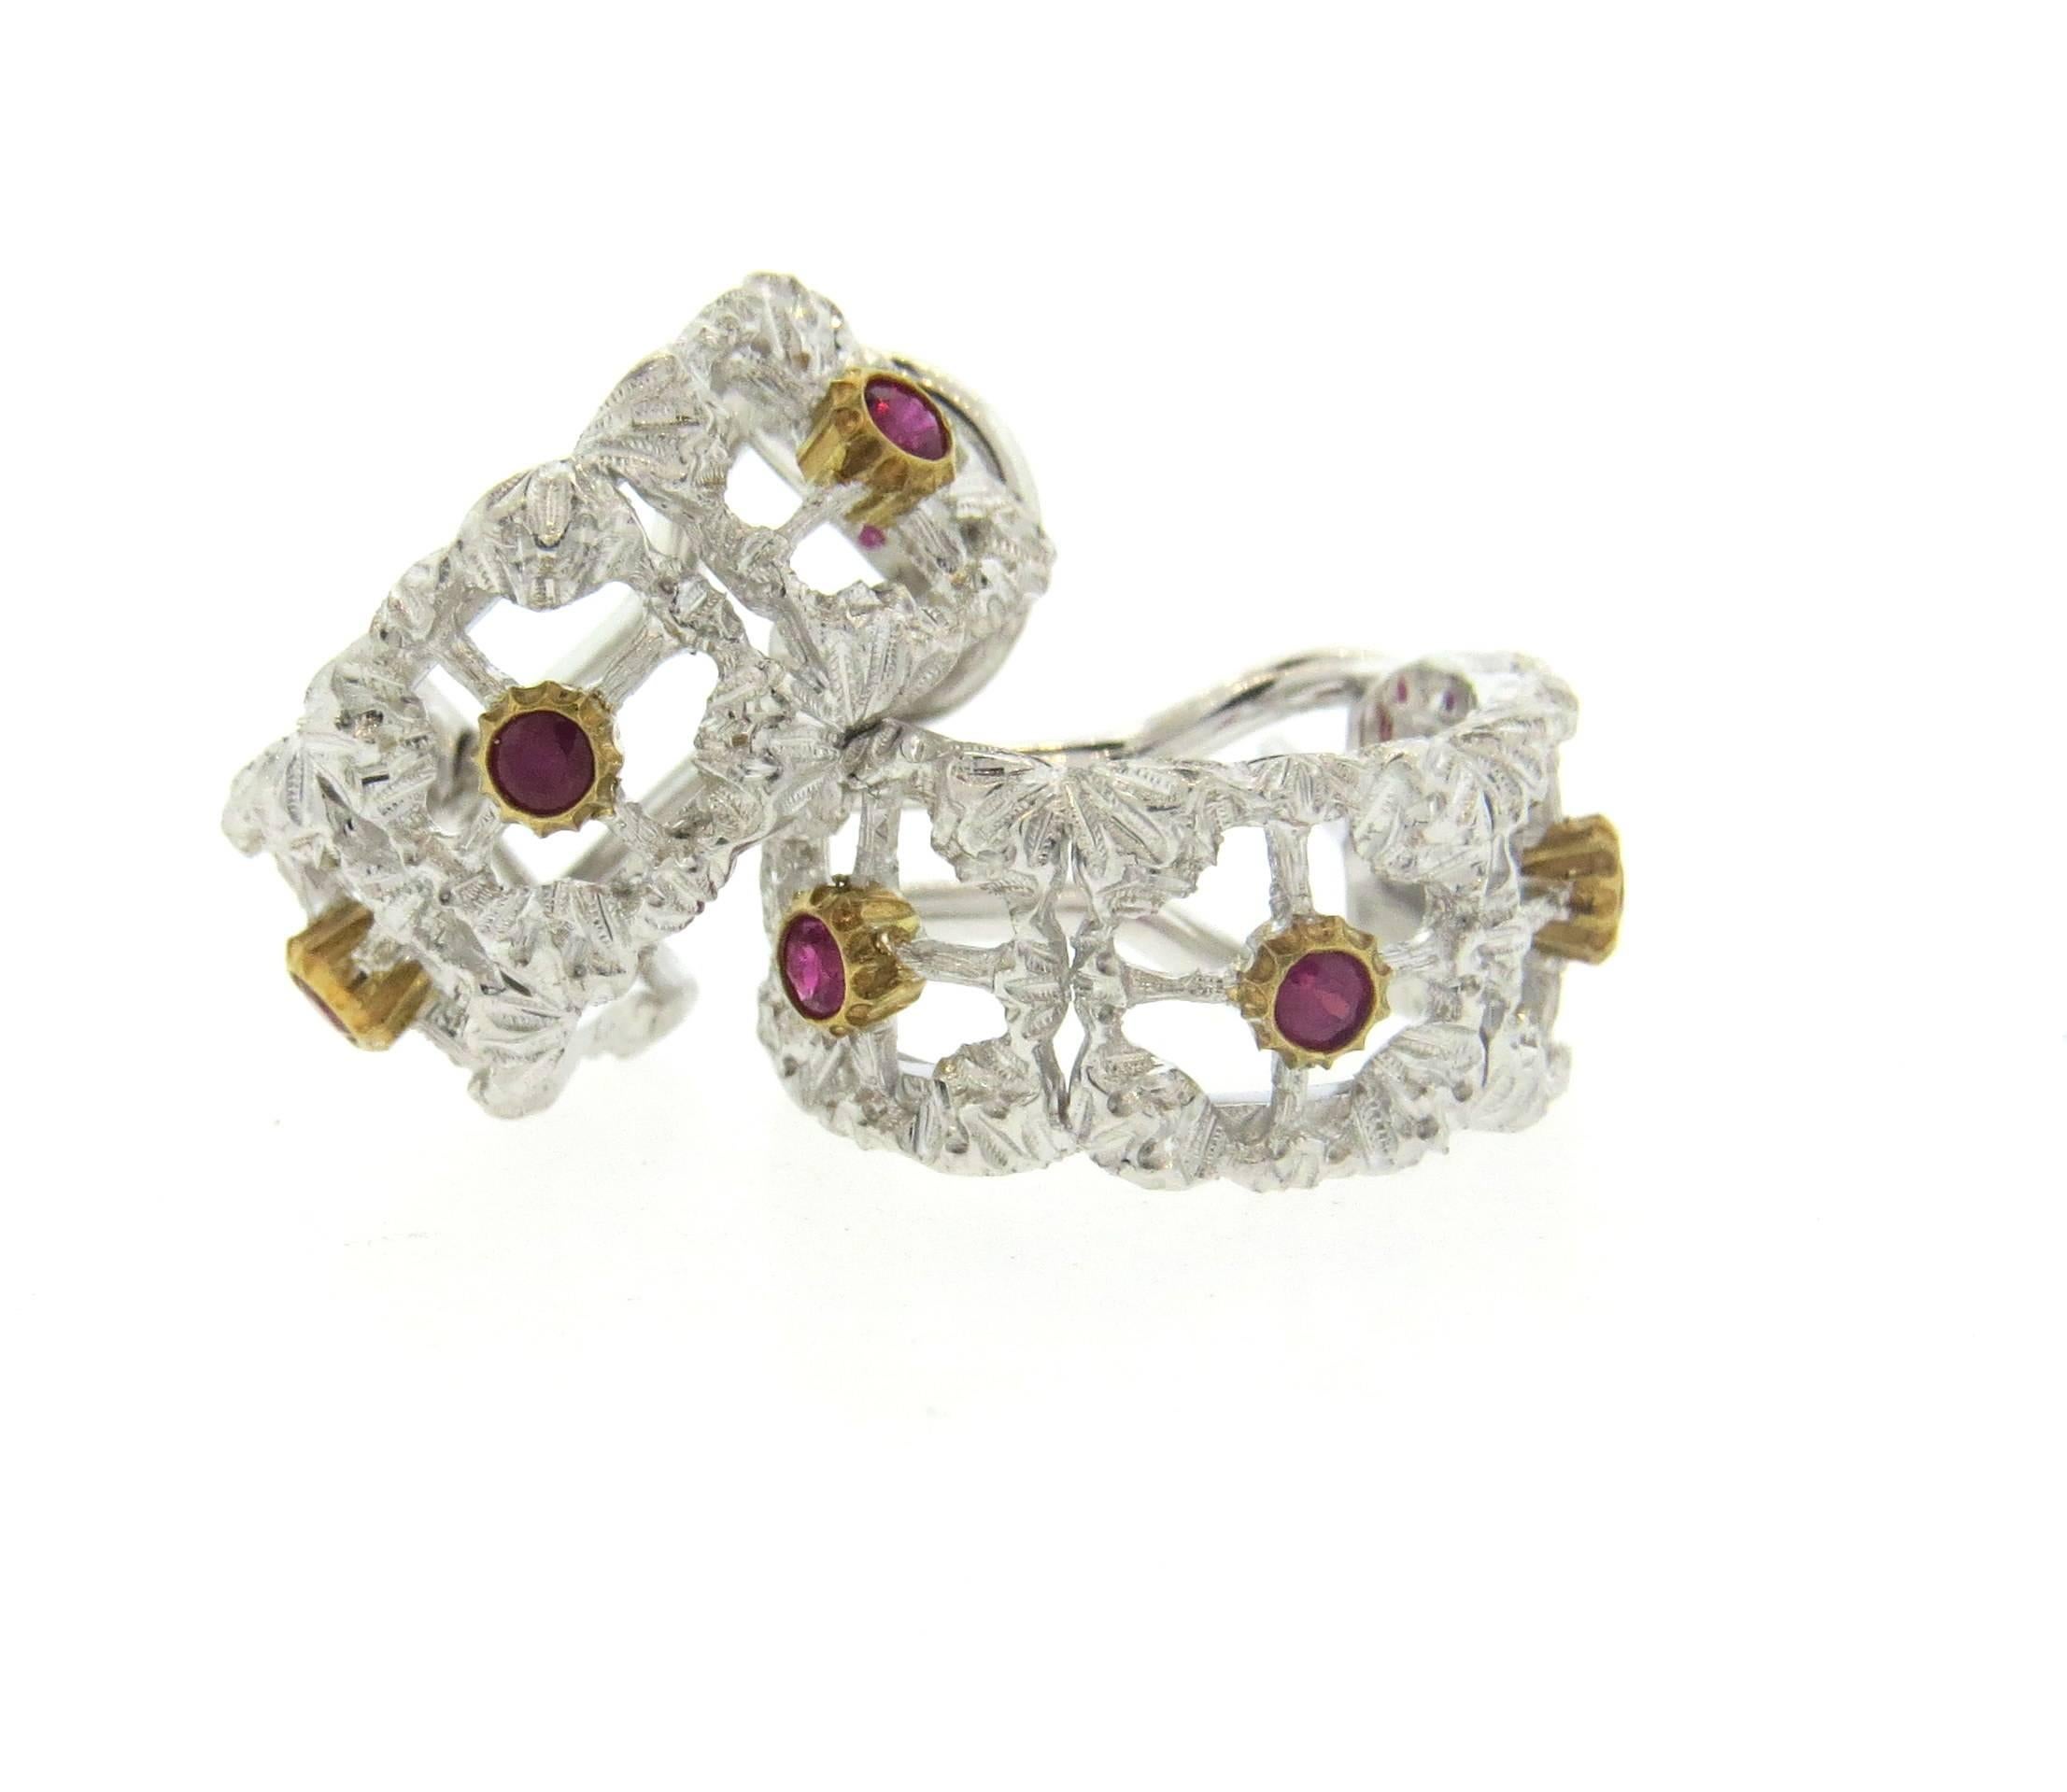 A pair of 18k white and yellow gold hoop earrings, crafted by Buccellati, decorated with rubies. Earrings are 17mm in diameter x 9mm wide  . Marked: Buccellati Italy 18k F5462. Weight - 10 grams 